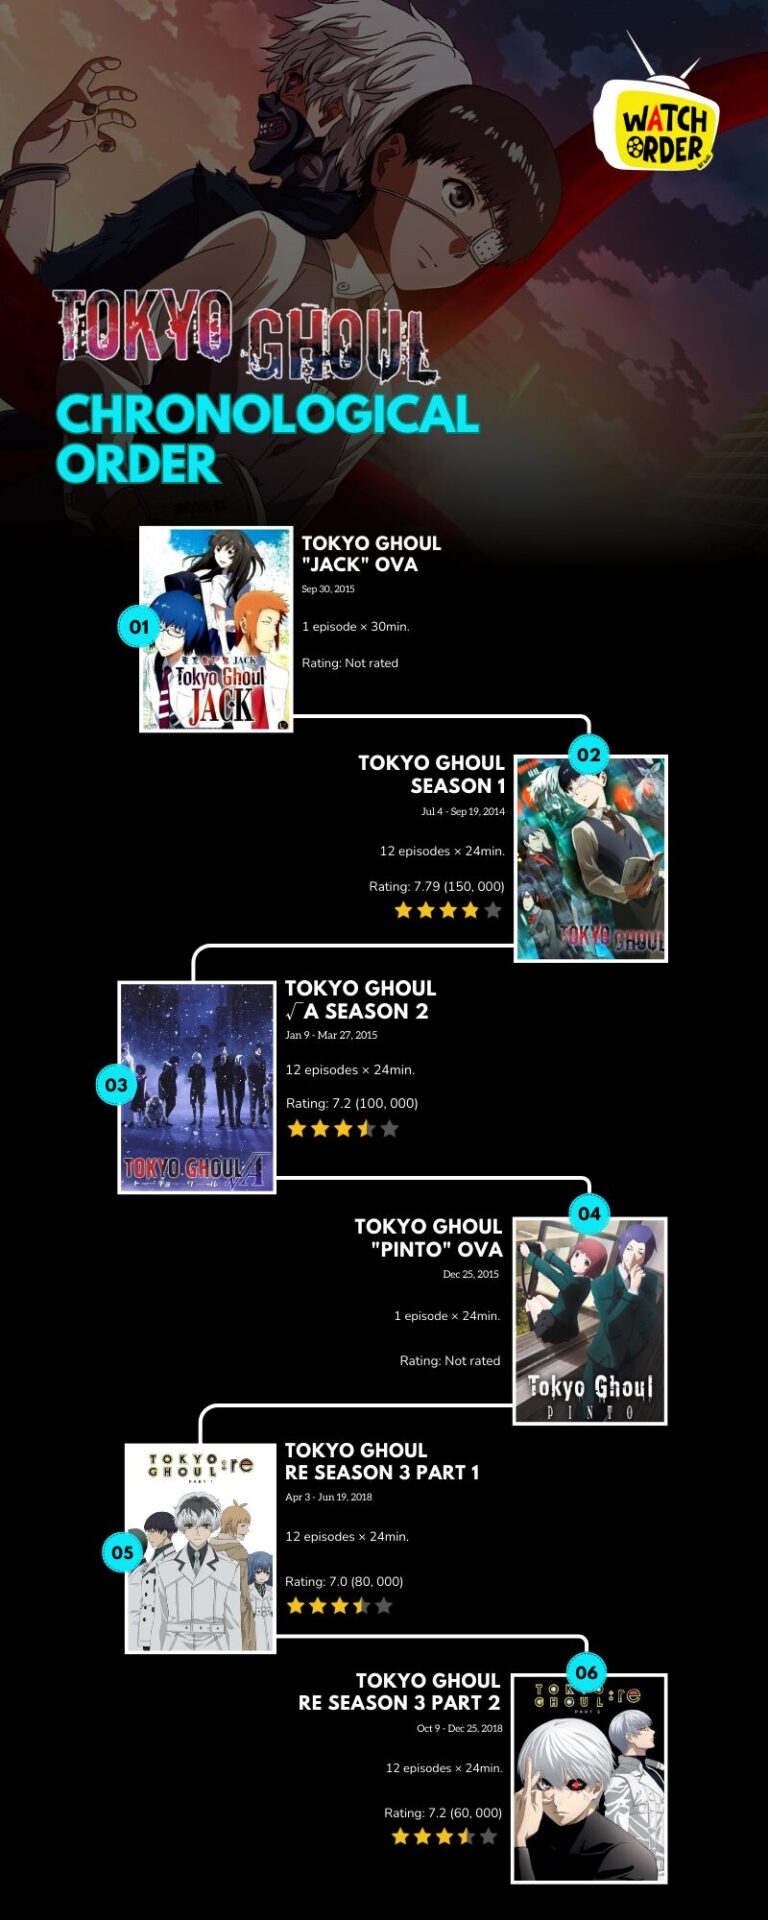 Tokyo Ghoul Chronological Order Infographic